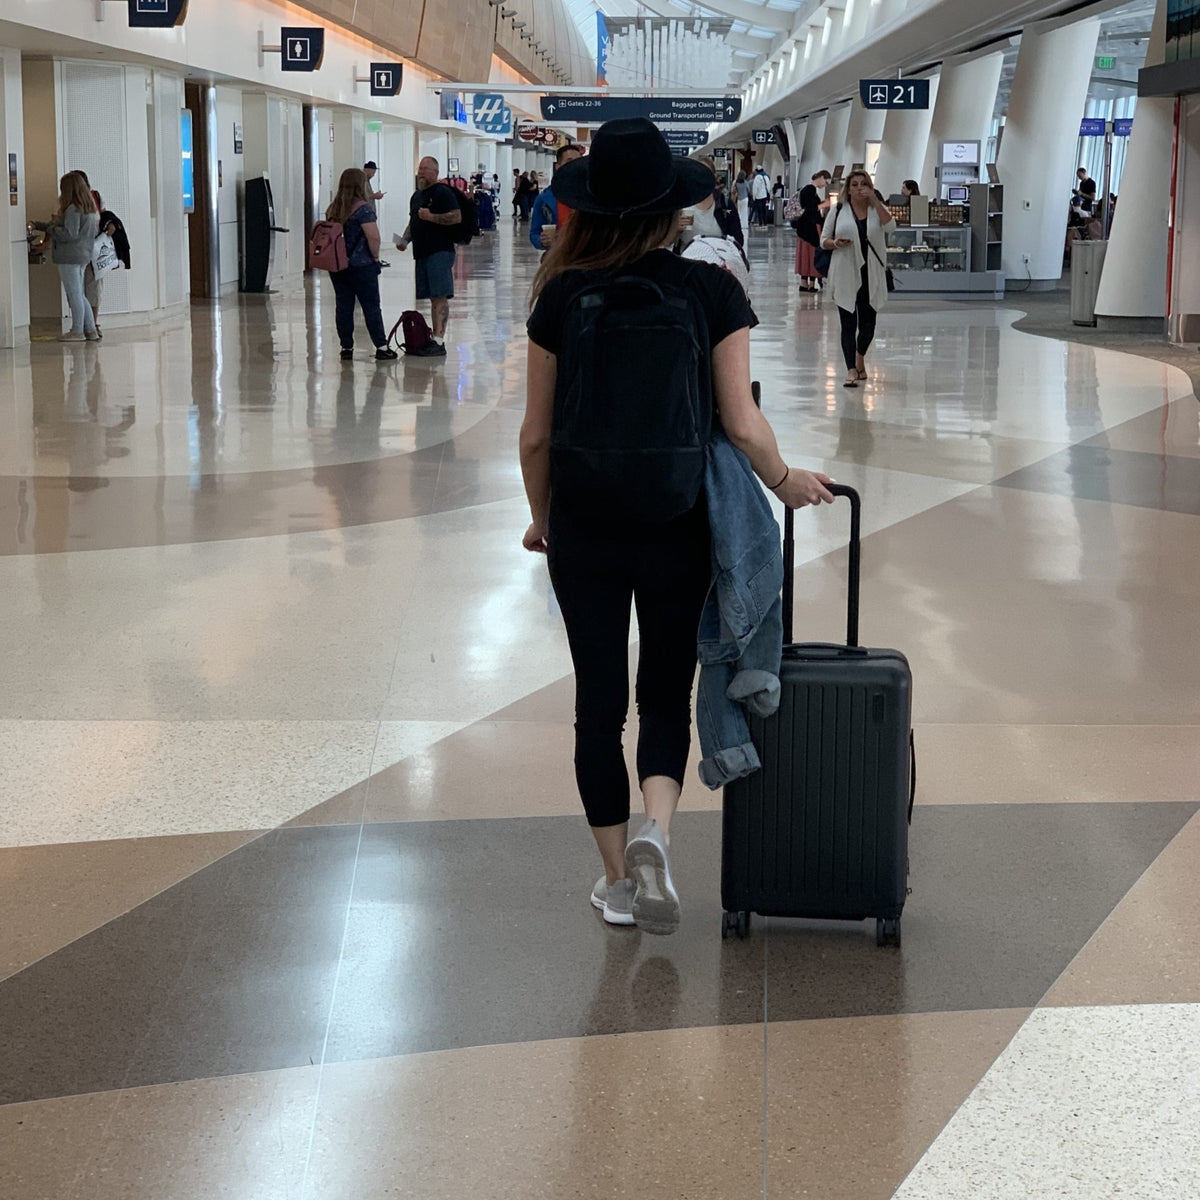 Lifewstyle photo of a woman walking through an airport with a brandless wheeled luggage bag.